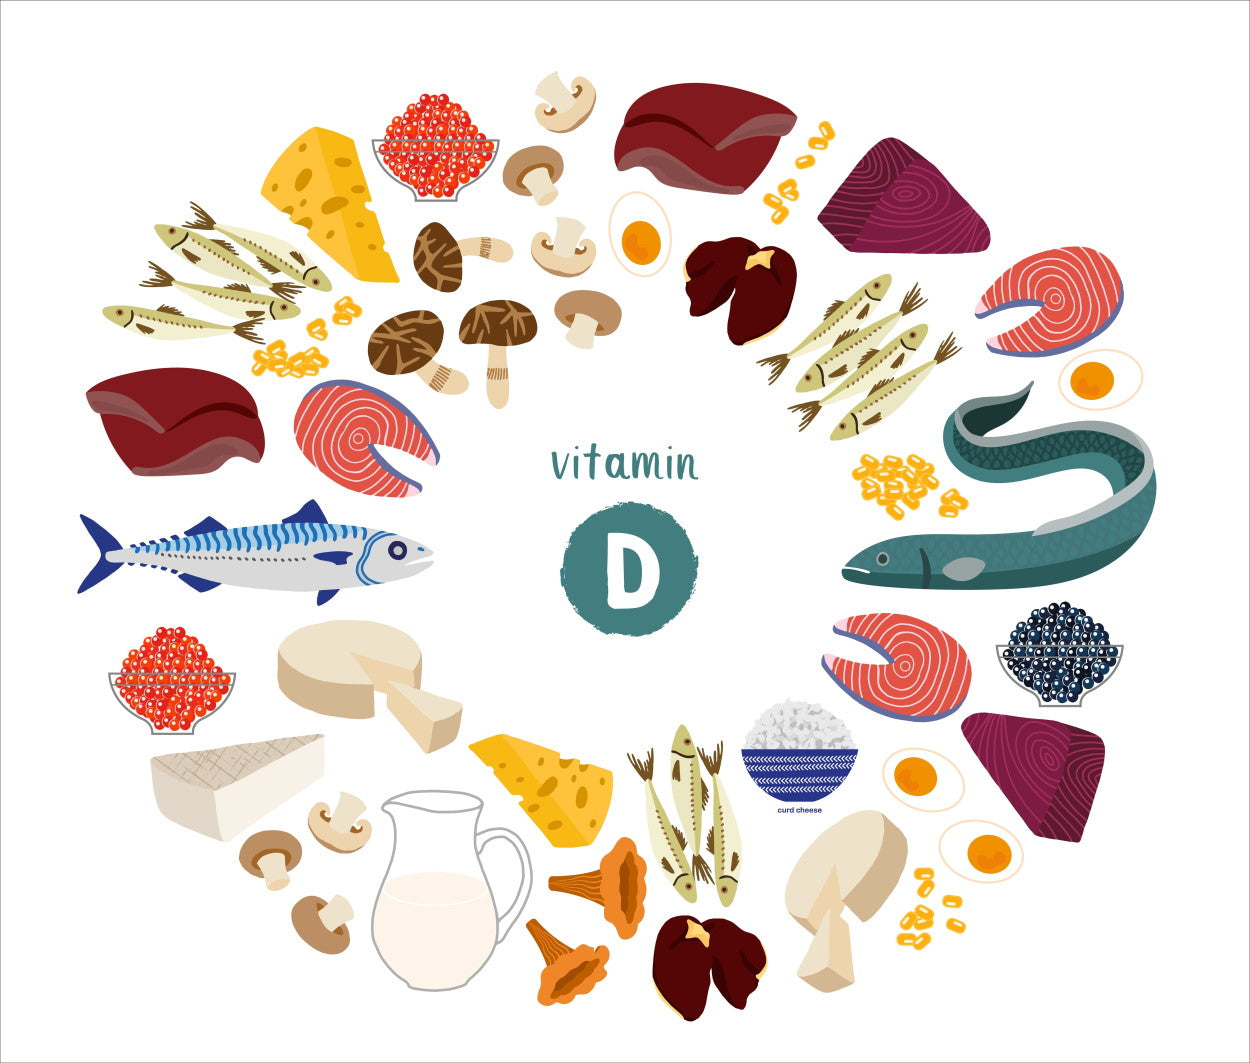 Illustration of foods with Vitamin D, including fish, cheese, mushrooms, and rice.